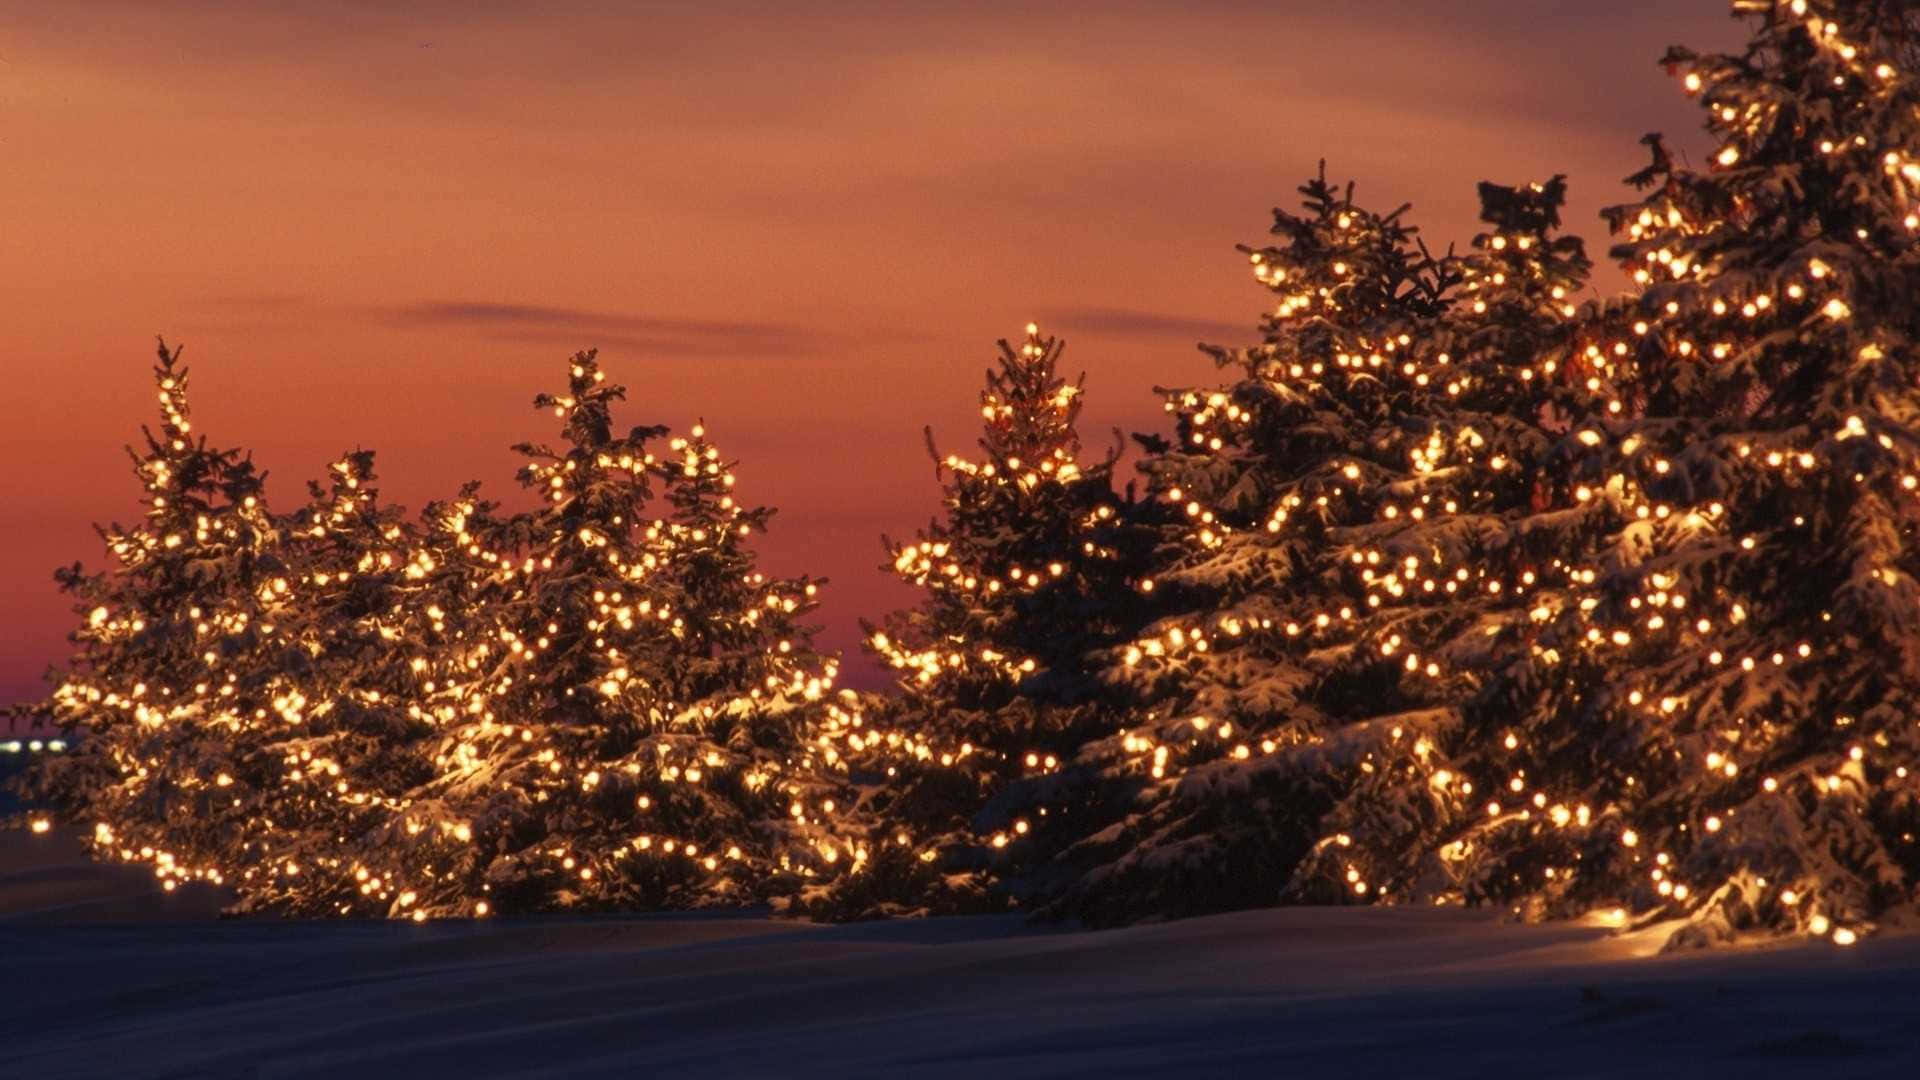 35 Christmas Aesthetic Photos to Put You in the Holiday Spirit  NP